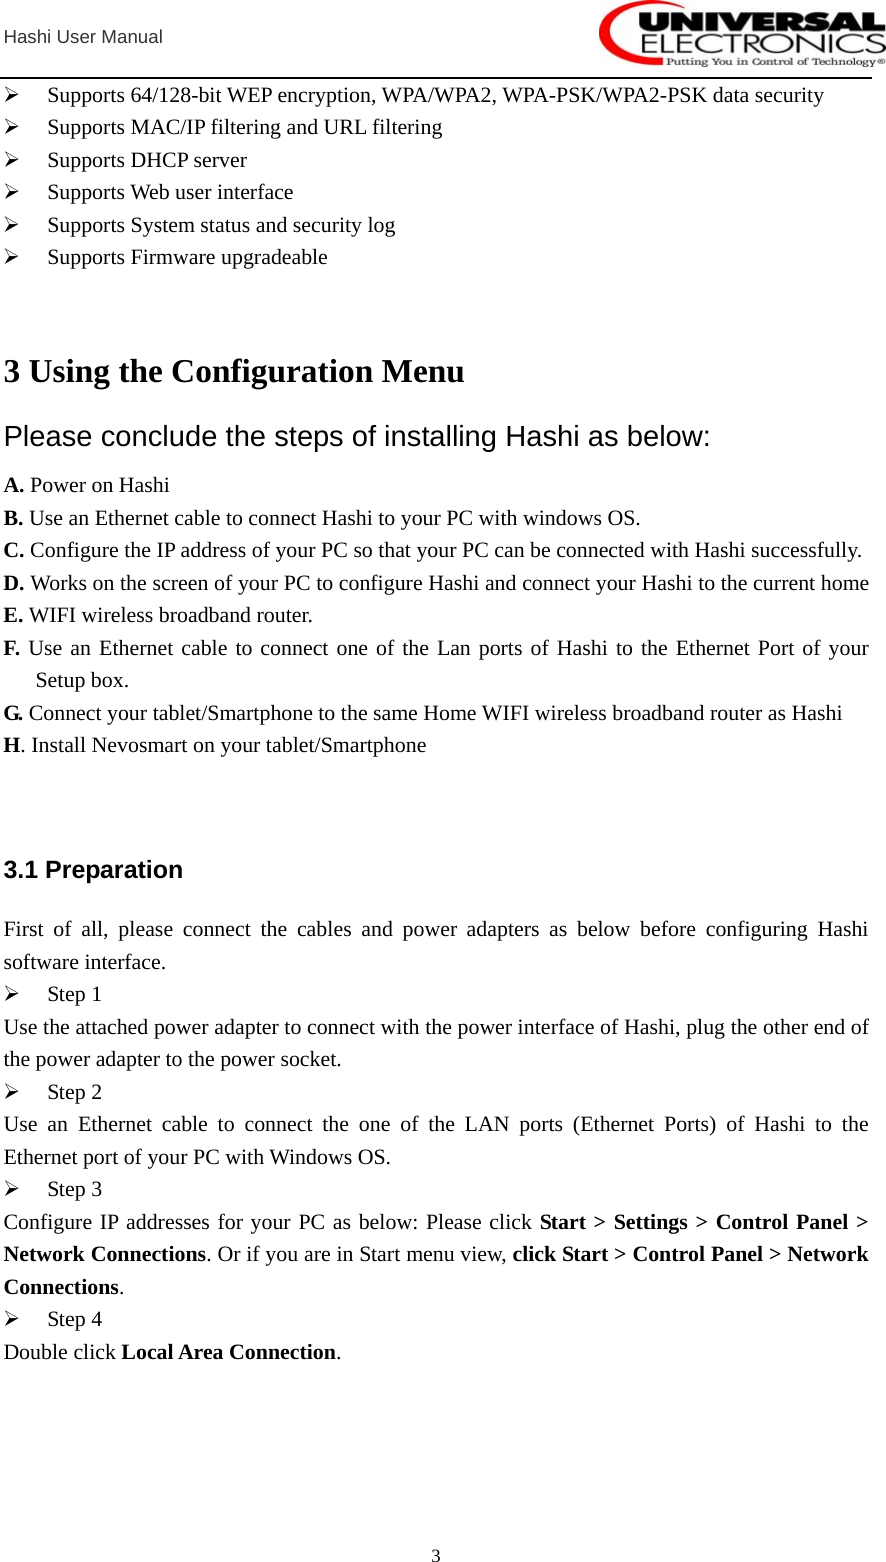  Hashi User Manual  3¾ Supports 64/128-bit WEP encryption, WPA/WPA2, WPA-PSK/WPA2-PSK data security ¾ Supports MAC/IP filtering and URL filtering ¾ Supports DHCP server ¾ Supports Web user interface ¾ Supports System status and security log ¾ Supports Firmware upgradeable   3 Using the Configuration Menu Please conclude the steps of installing Hashi as below: A. Power on Hashi B. Use an Ethernet cable to connect Hashi to your PC with windows OS. C. Configure the IP address of your PC so that your PC can be connected with Hashi successfully. D. Works on the screen of your PC to configure Hashi and connect your Hashi to the current home E. WIFI wireless broadband router. F. Use an Ethernet cable to connect one of the Lan ports of Hashi to the Ethernet Port of your Setup box. G. Connect your tablet/Smartphone to the same Home WIFI wireless broadband router as Hashi H. Install Nevosmart on your tablet/Smartphone     3.1 Preparation First of all, please connect the cables and power adapters as below before configuring Hashi software interface. ¾ Step 1 Use the attached power adapter to connect with the power interface of Hashi, plug the other end of the power adapter to the power socket.   ¾ Step 2 Use an Ethernet cable to connect the one of the LAN ports (Ethernet Ports) of Hashi to the Ethernet port of your PC with Windows OS. ¾ Step 3 Configure IP addresses for your PC as below: Please click Start &gt; Settings &gt; Control Panel &gt; Network Connections. Or if you are in Start menu view, click Start &gt; Control Panel &gt; Network Connections. ¾ Step 4 Double click Local Area Connection. 